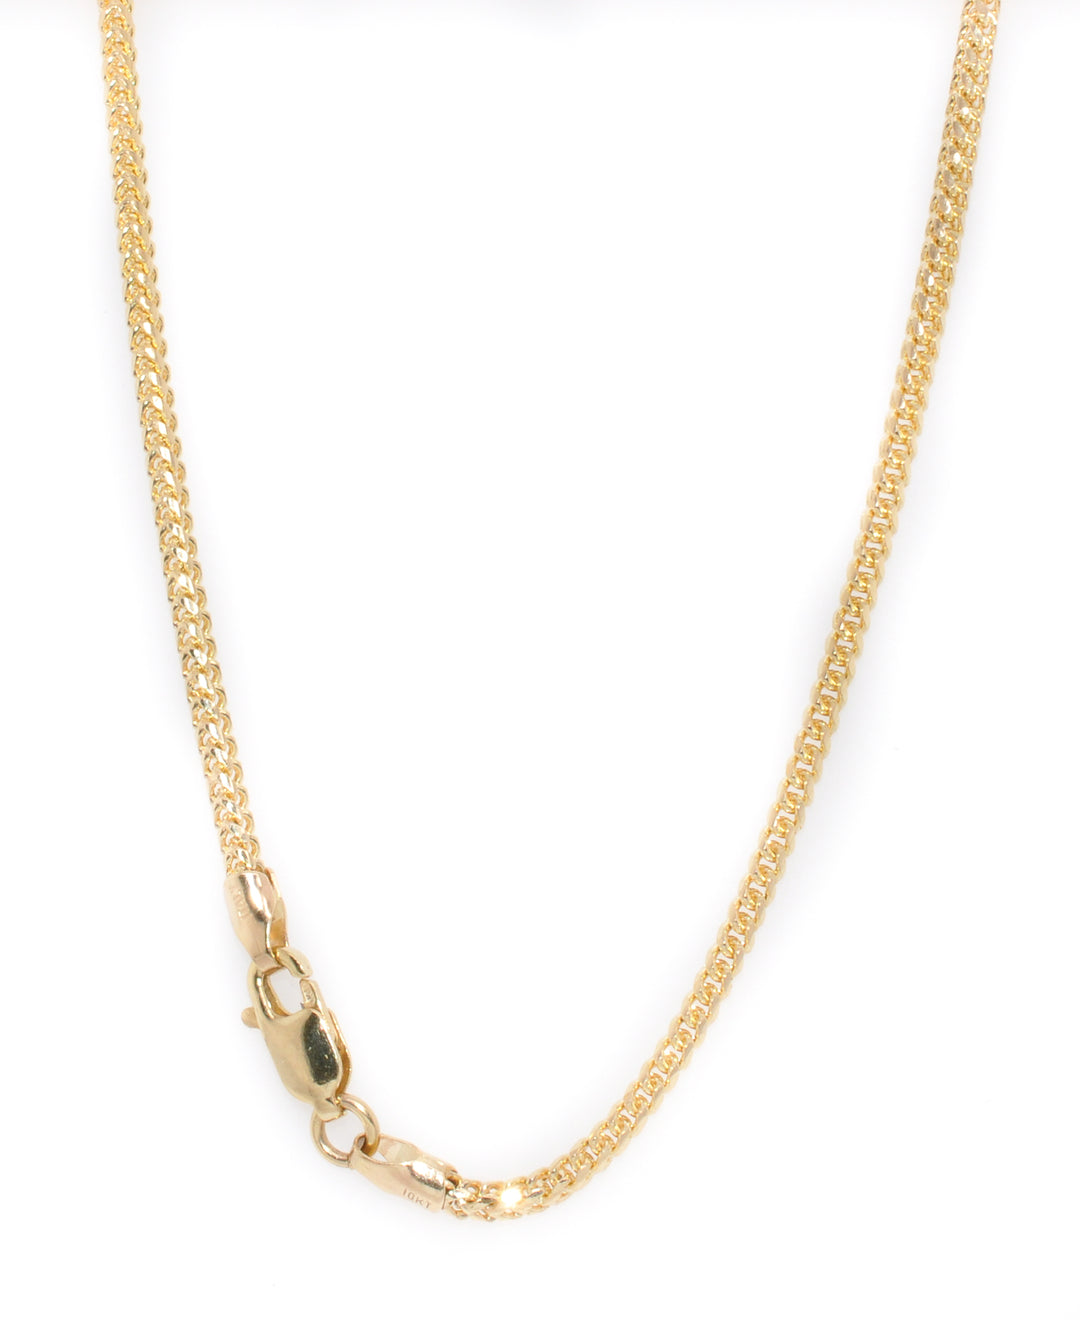 10KT Yellow Gold 22" 1.8mm Franco Chain.